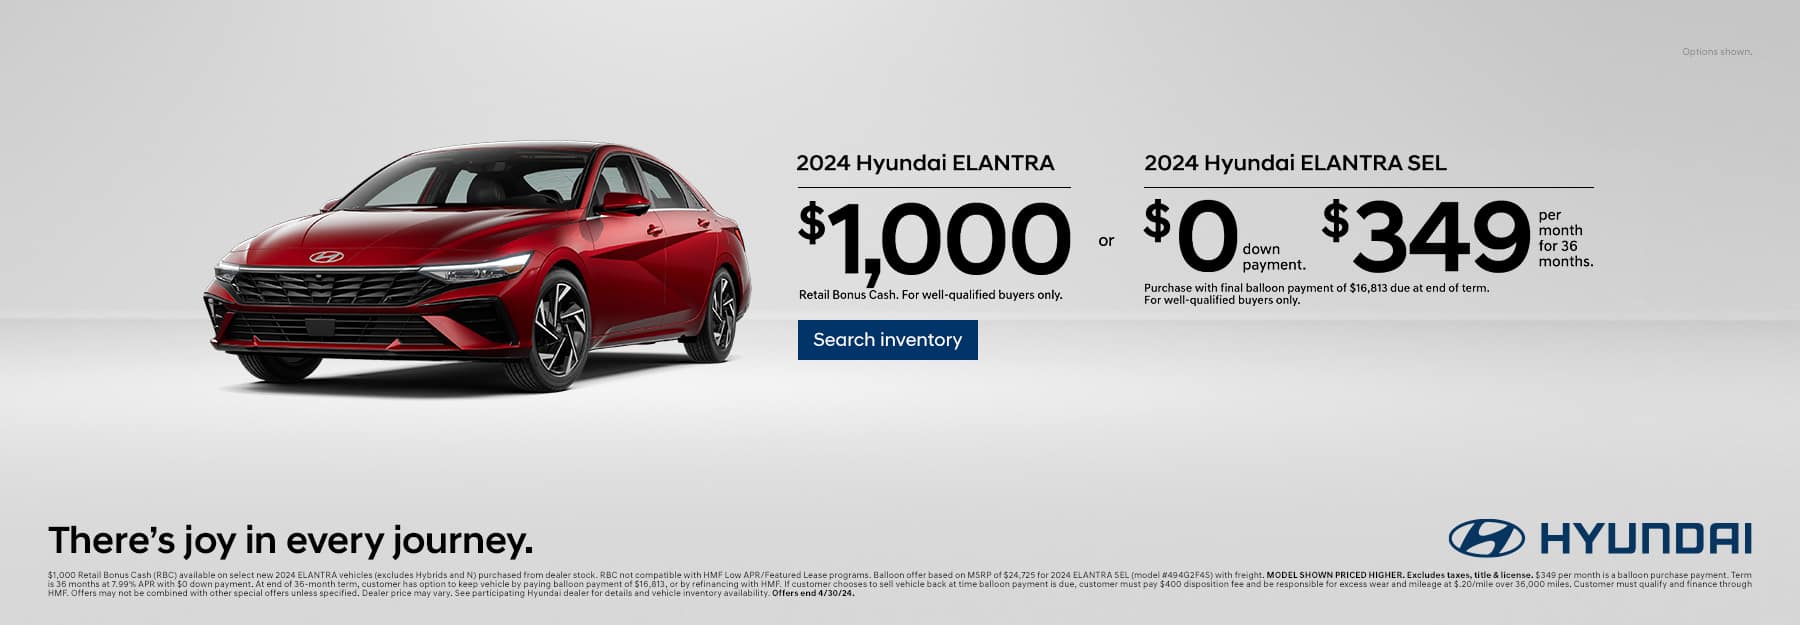 Drive the New 2024 Tucson SE for $349/mo for 39 mo lease with only $1 down -or- Purchase the New 2024 Hyundai Tucson and choose 2.99% APR for 60 months or $1500 HMF Bonus Cash | Drive the New 2023 Santa Fe SE for only $409/mo for 39 mo lease with only $1 down -or- Purchase the New 2023 Hyundai Santa Fe SEL and choose $3000 HMF Bonus Cash or 2.99 APR for 60 months + $1500 HMF Bonus Cash